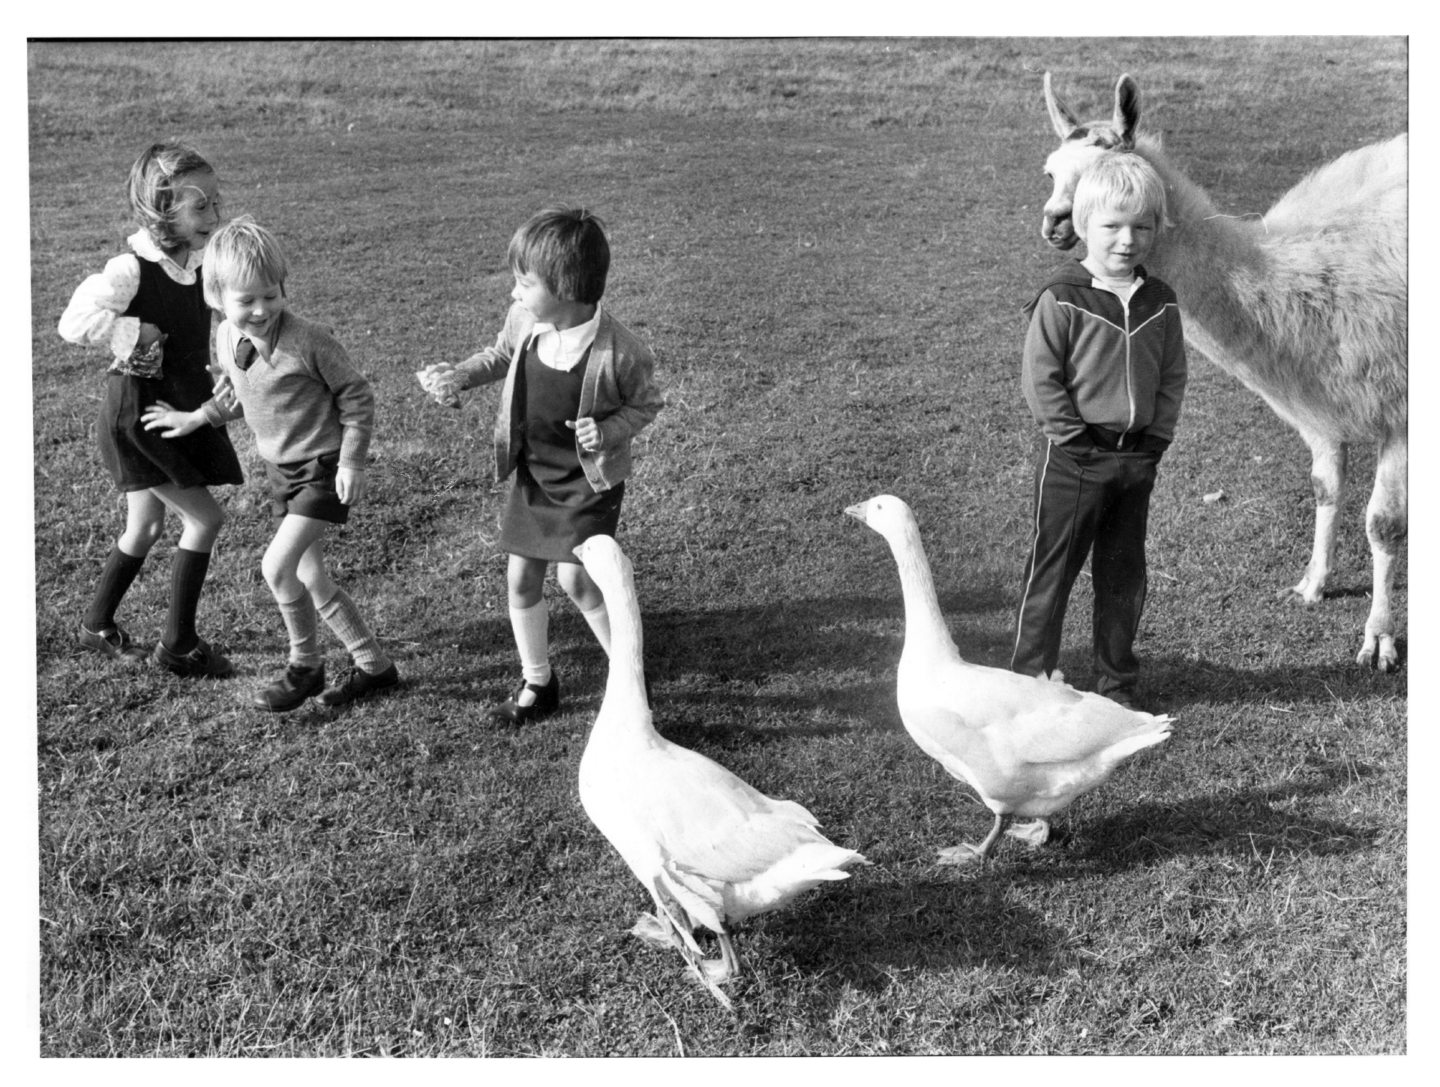 Children interacting with geese and a llama at Doonies Farm in Aberdeen in 1980.